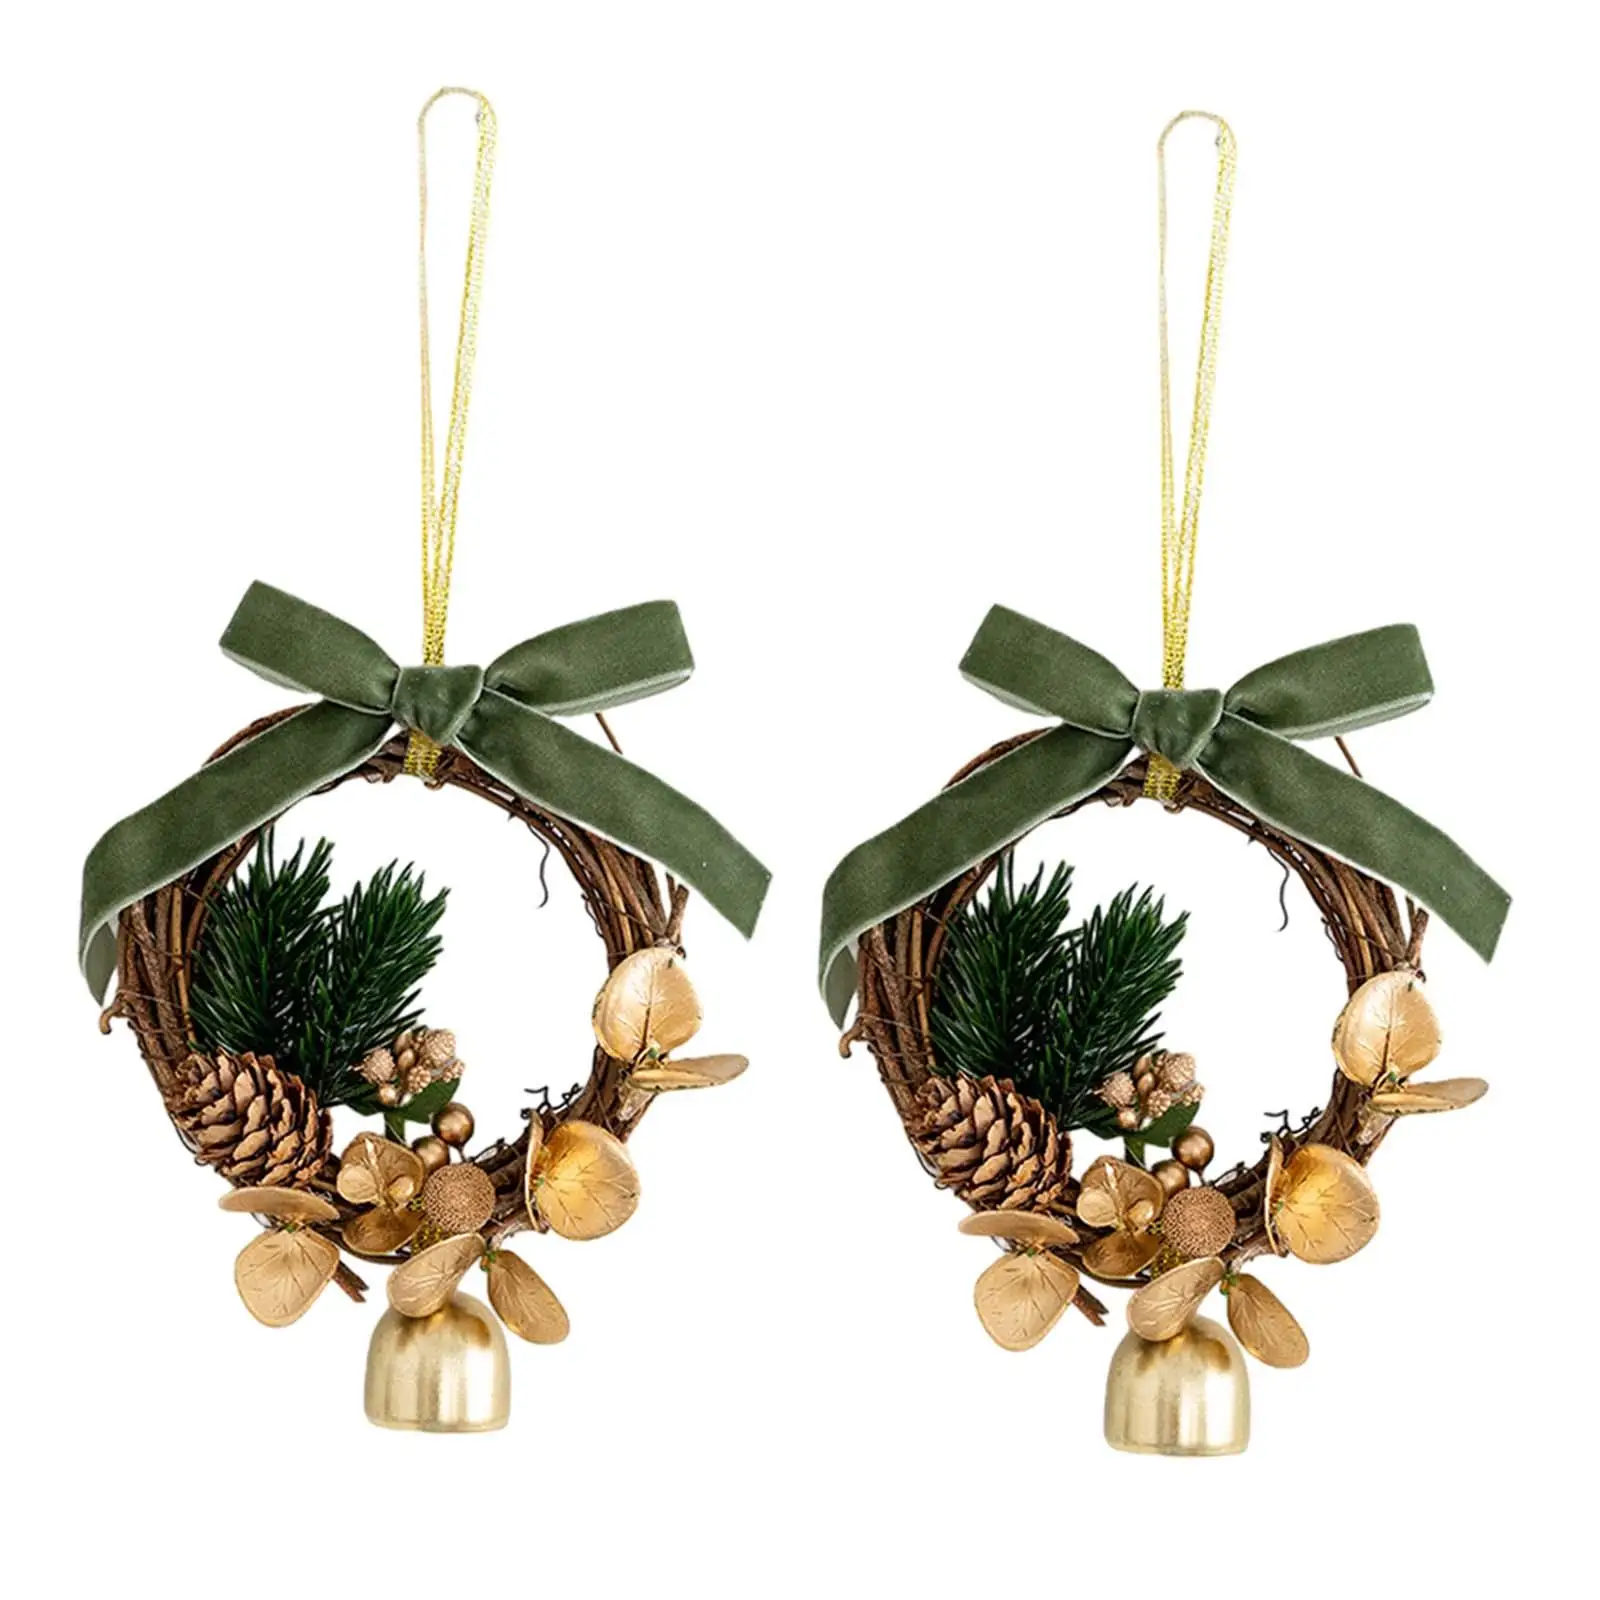 Christmas Mini Wreath Christmas Hanging Home Party Decoration Xmas Mini Wreath for Front Door Xmas Tree Farmhouse Indoor Stair